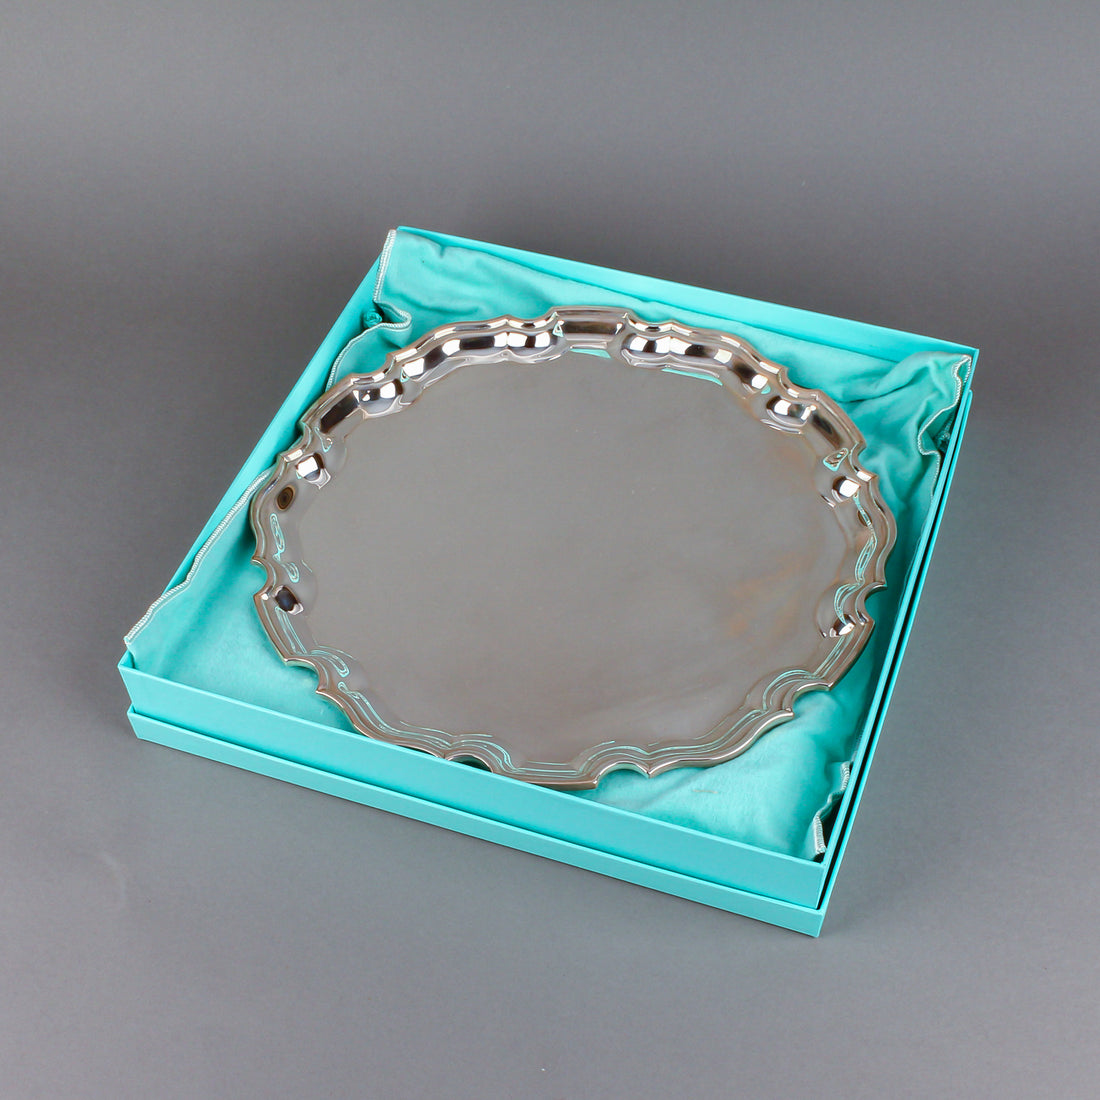 TIFFANY & CO. Chippendale Sterling Silver Tray